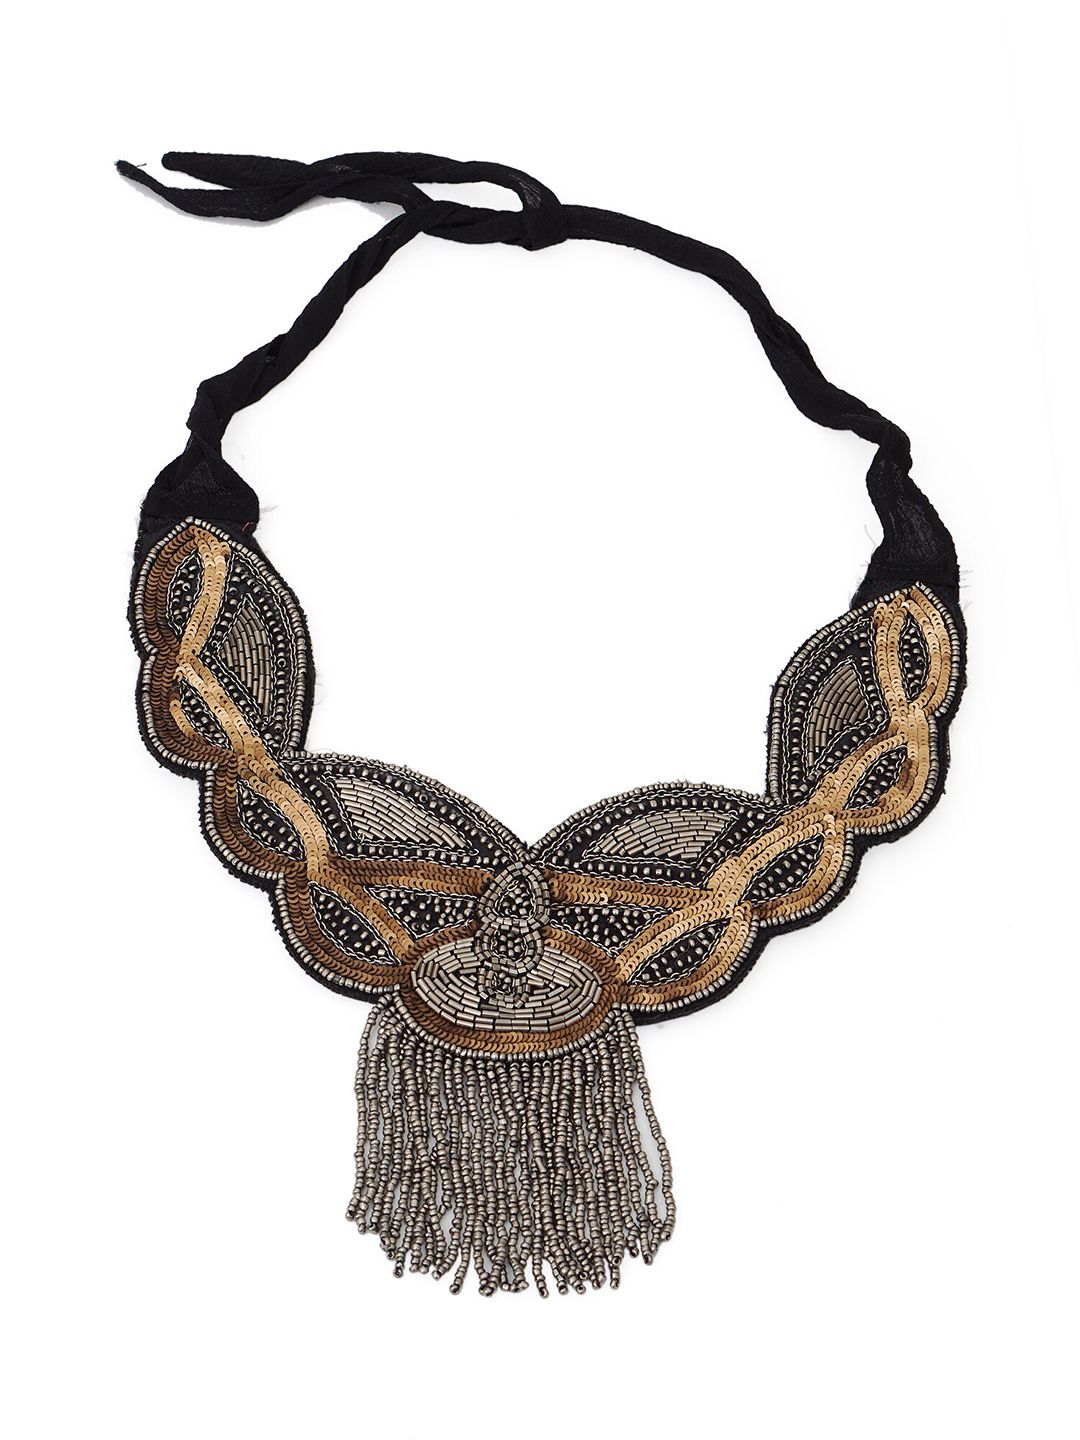 Diwaah Black & Gold-Toned Embellished Fabric Necklace Price in India